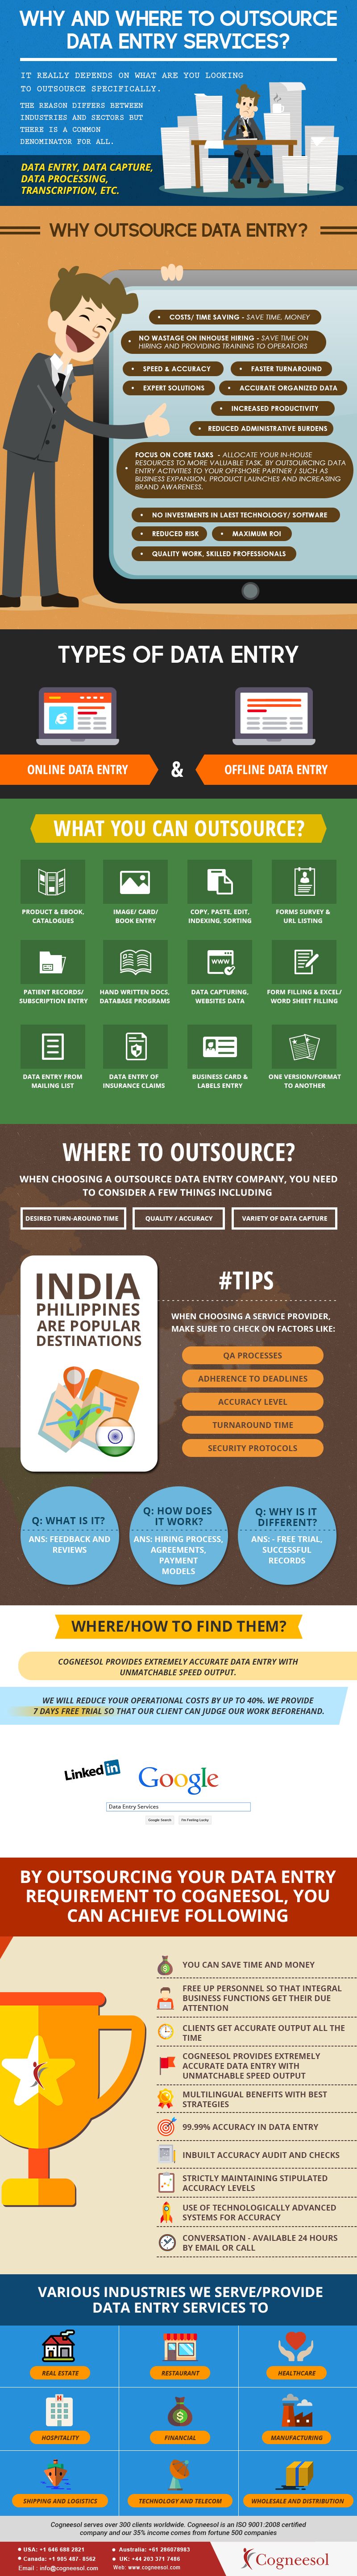 Outsource Data Entry Services - Infographic